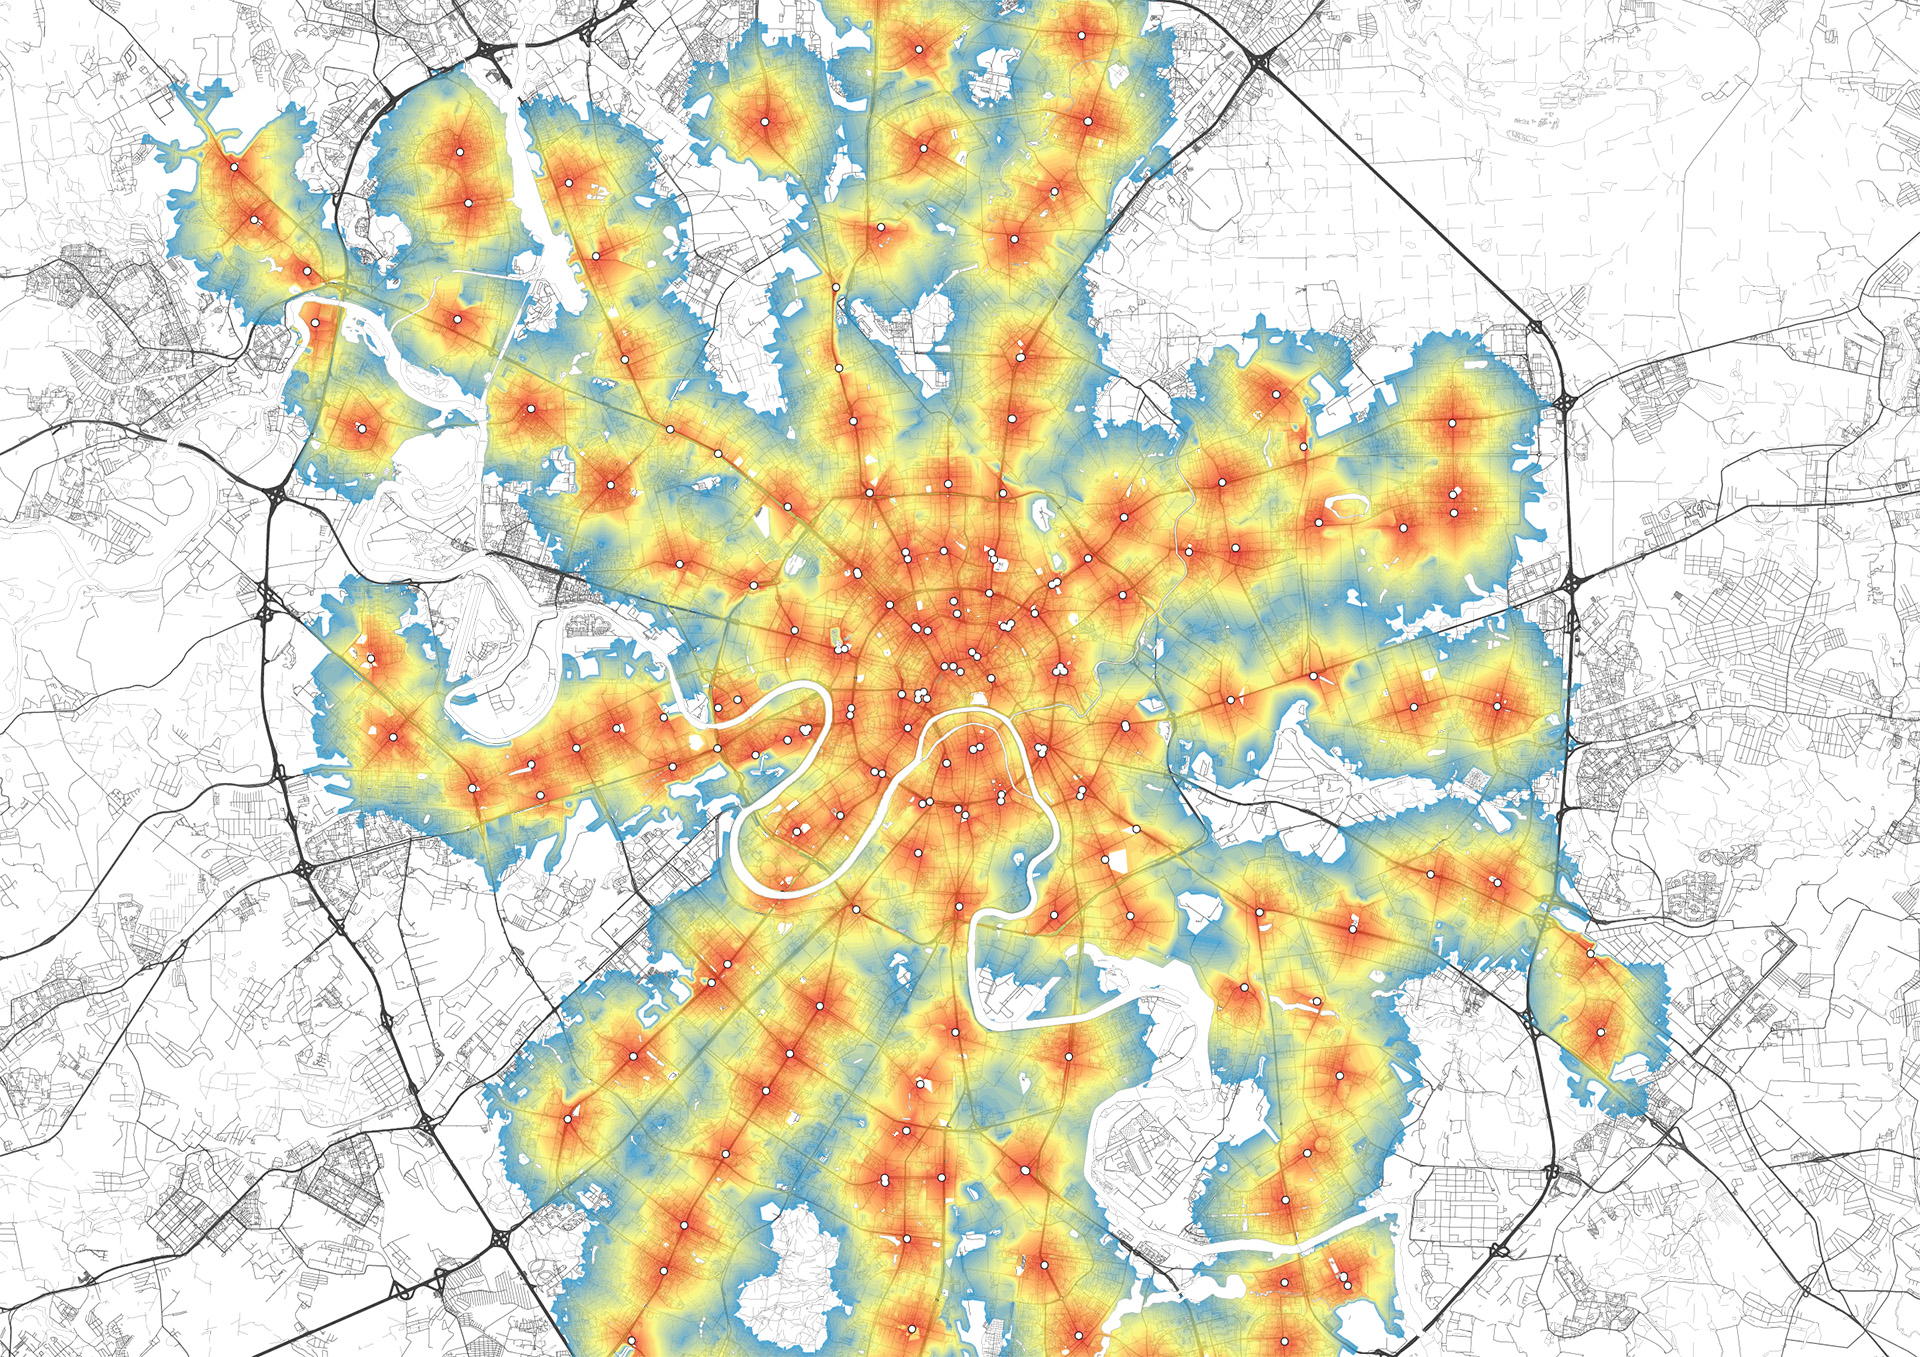 Bicycle isochrone accessibility to metro stations